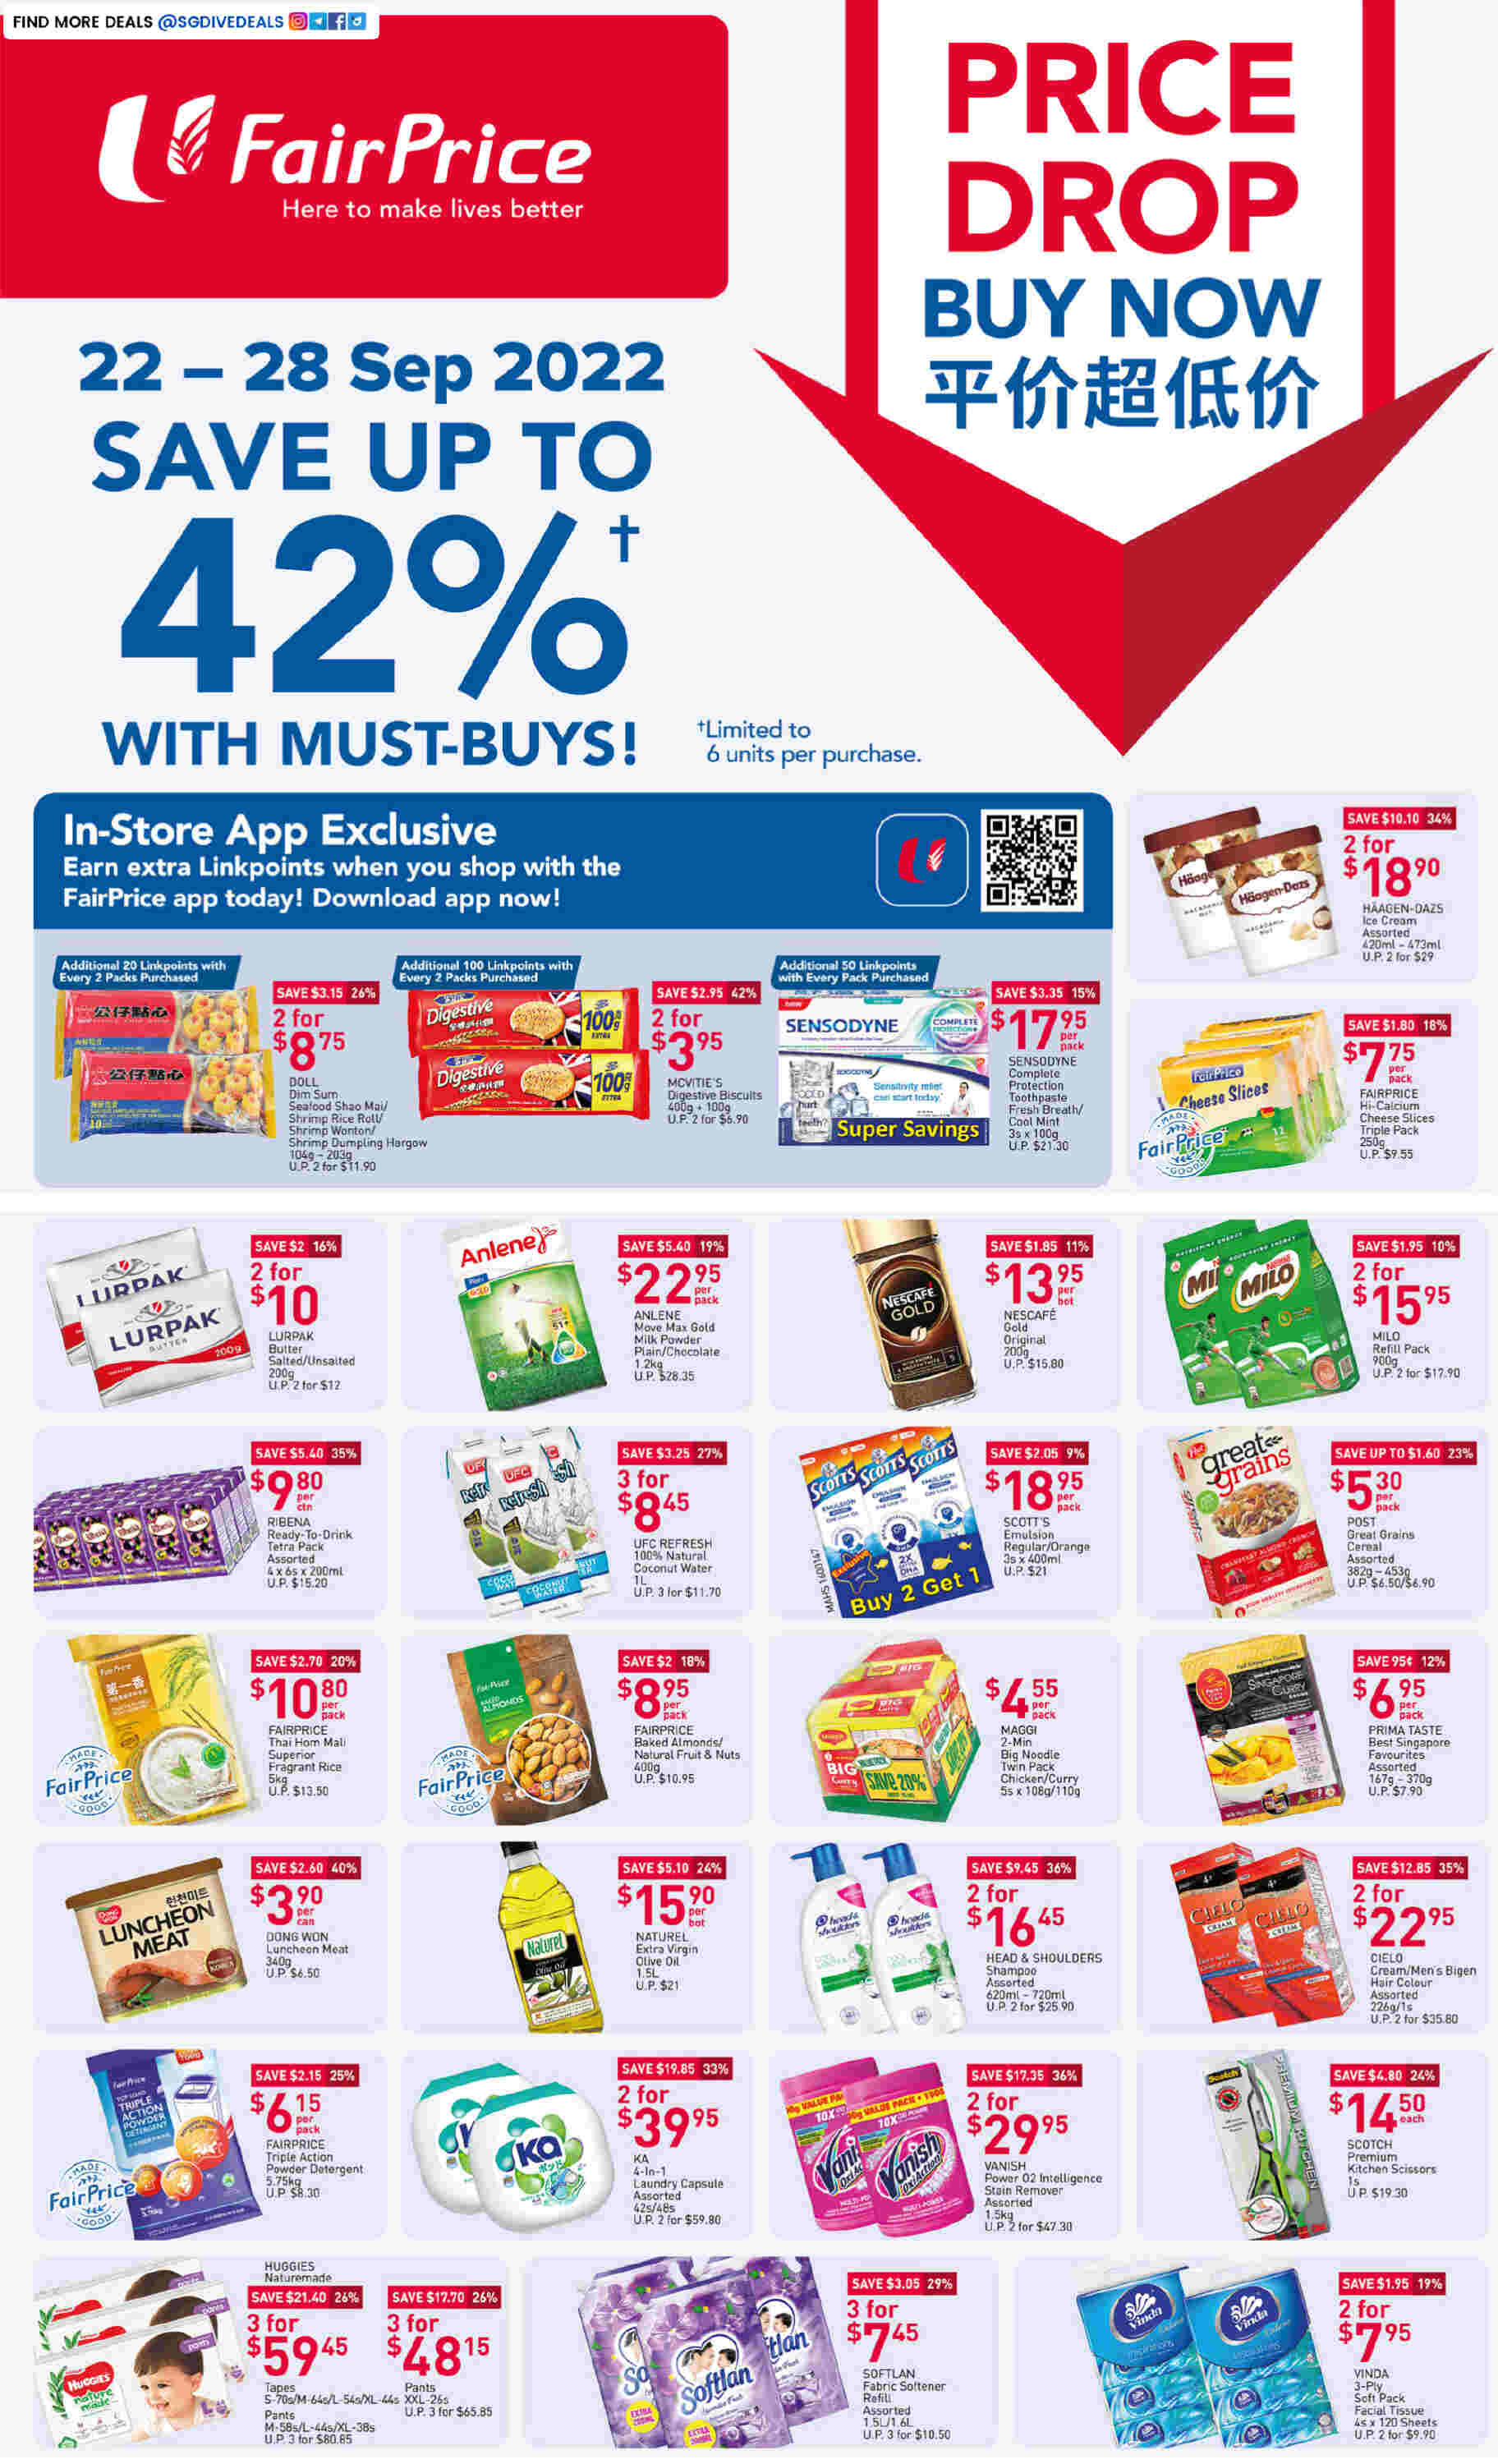 NTUC FairPrice,Price Drop Buy Now Save up to 42%